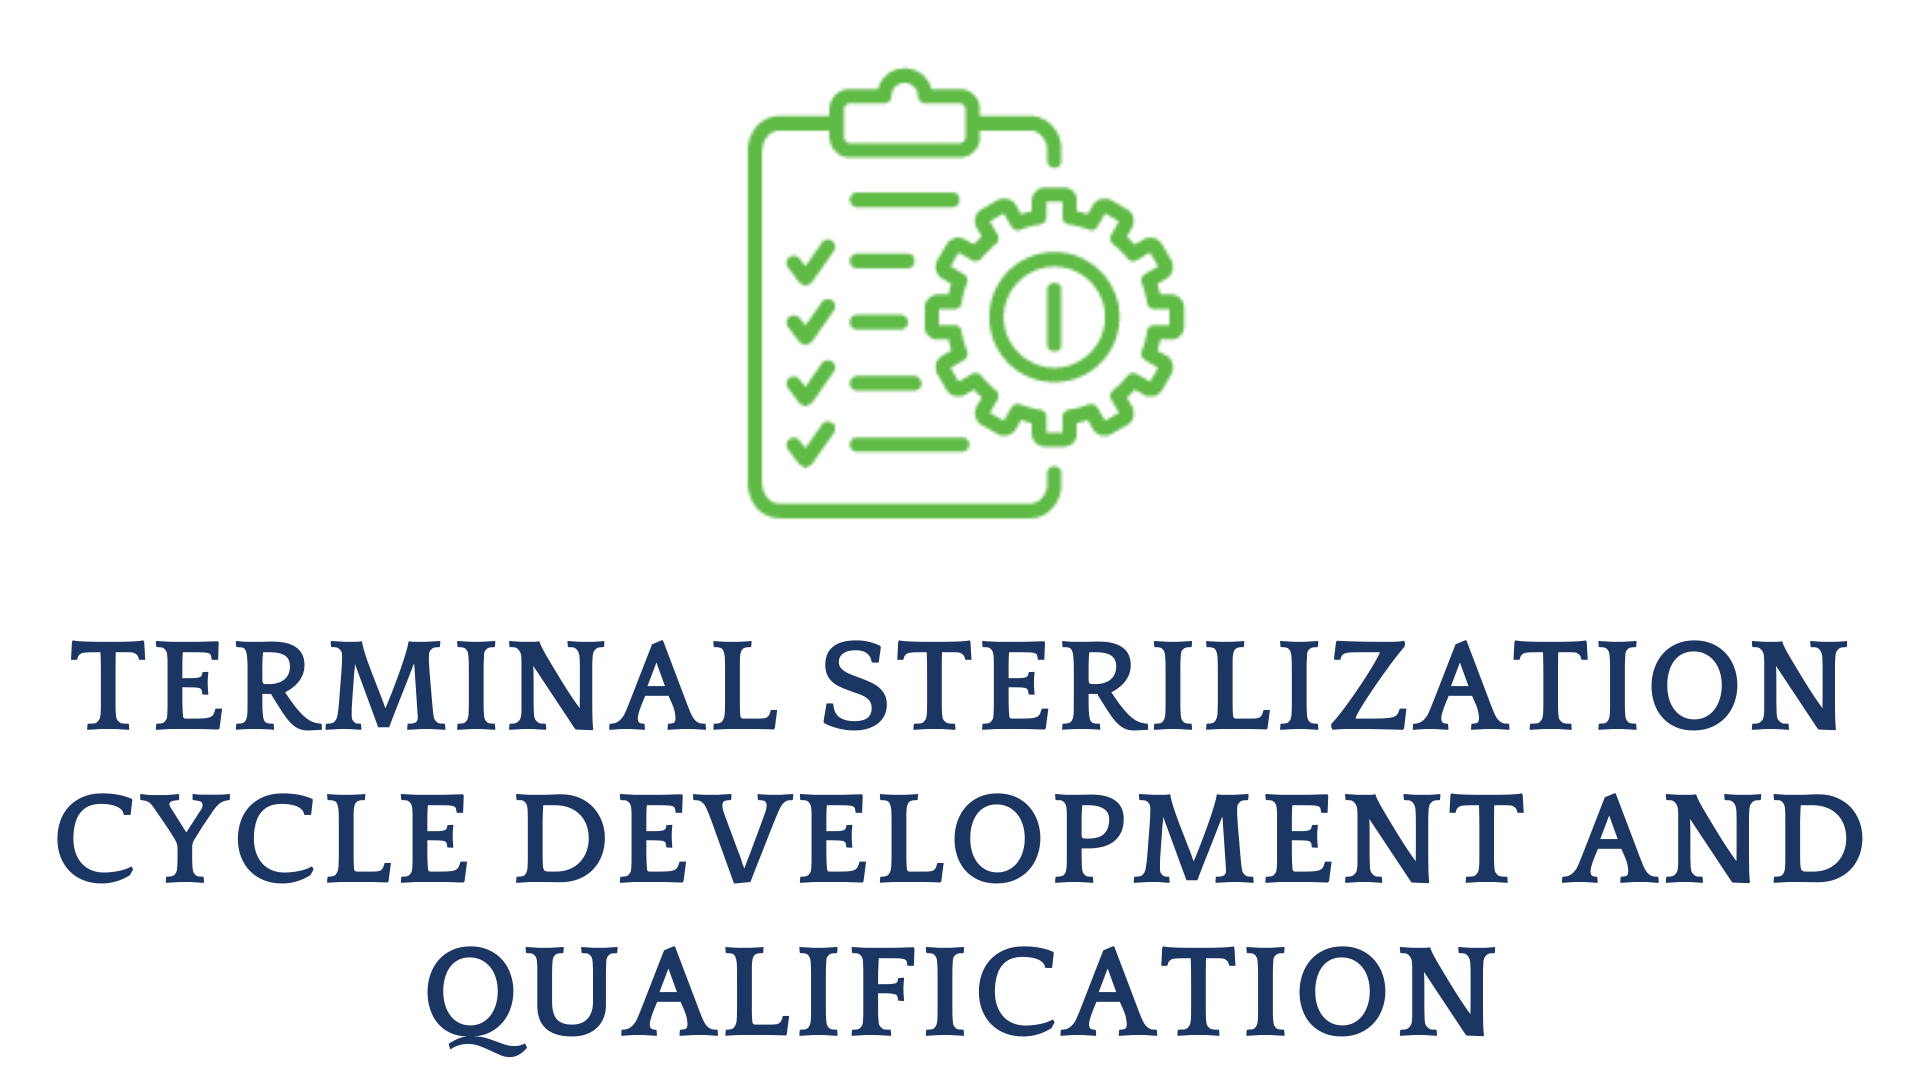 Terminal Sterilization Cycle Development And Qualification